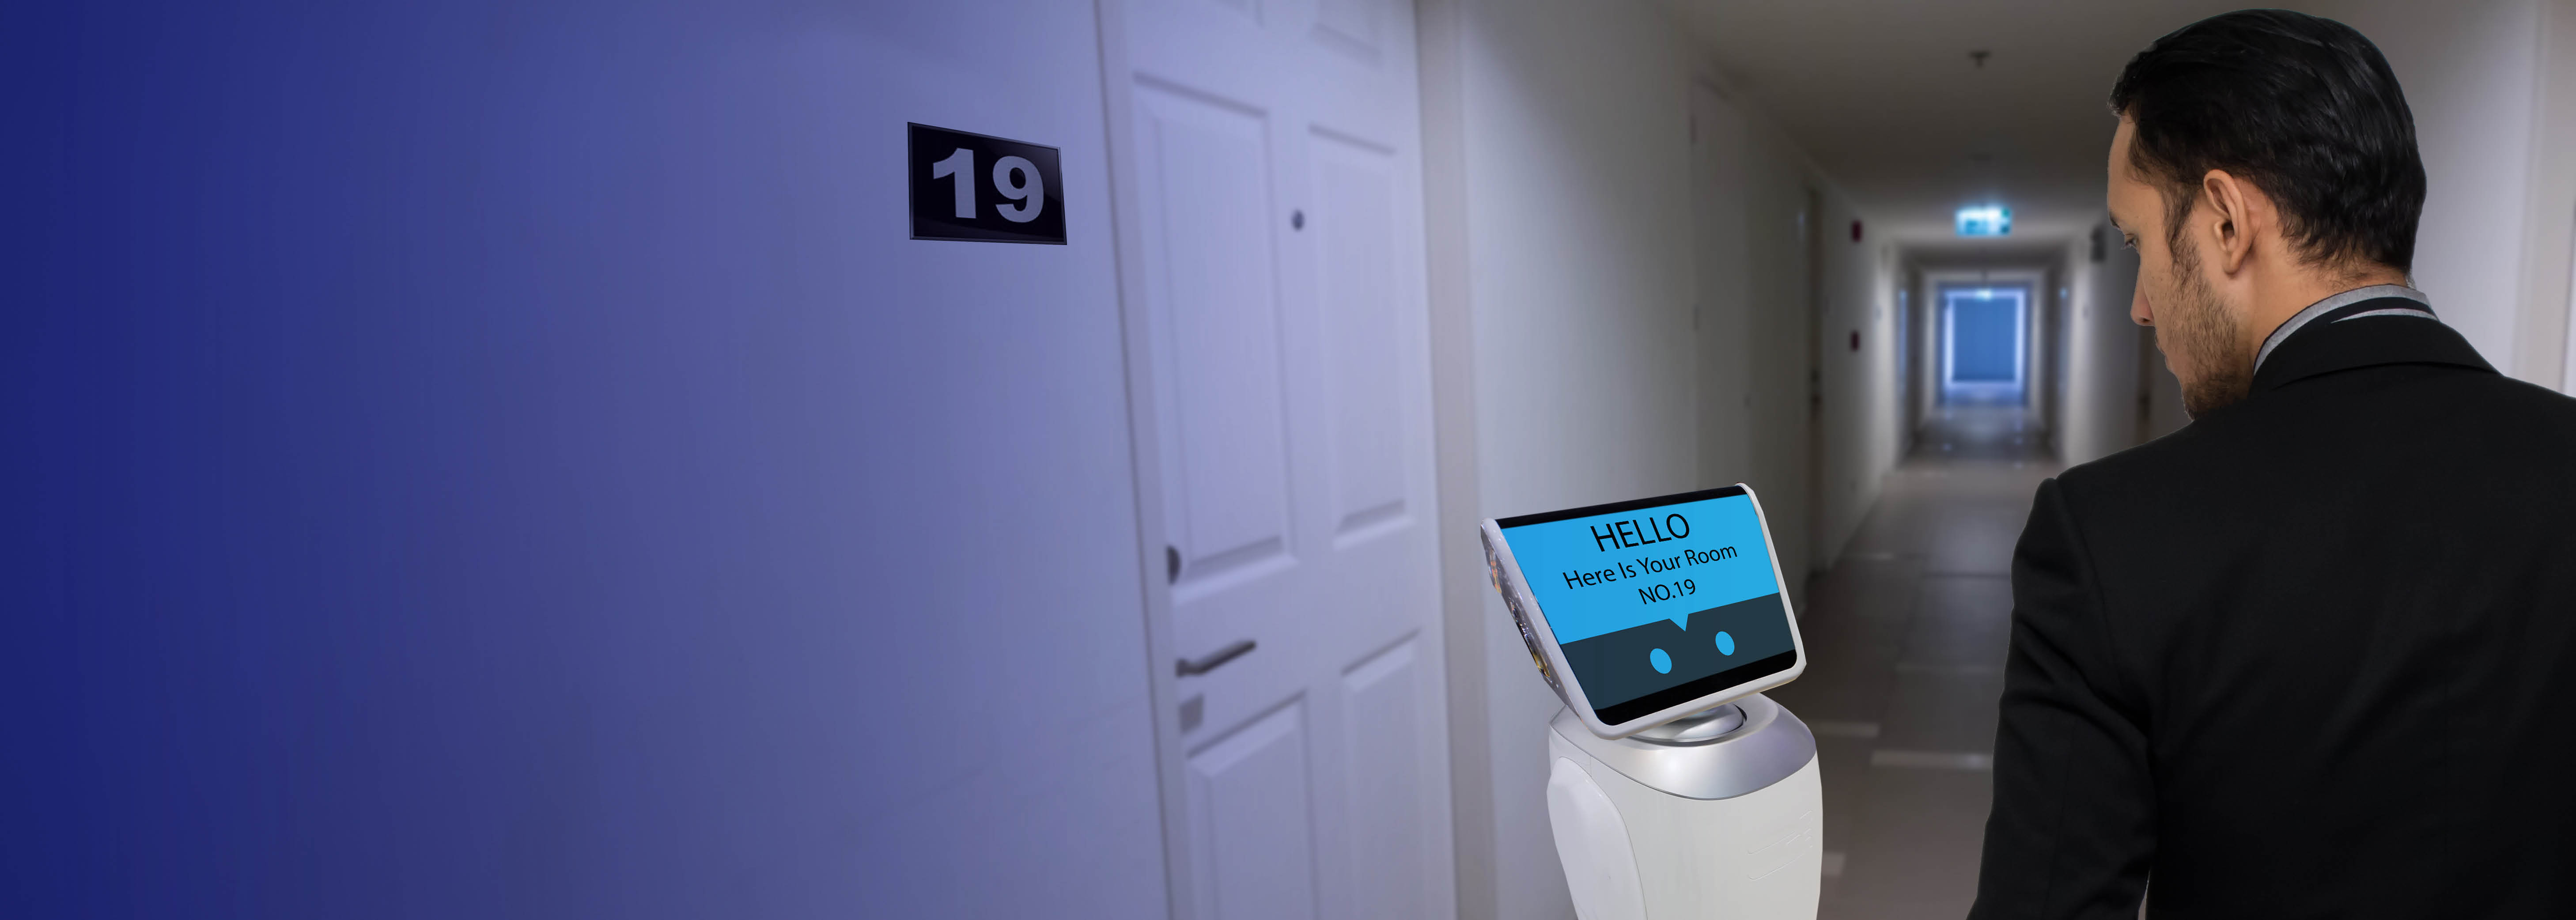 Businessman using automated personalization to find his hotel room